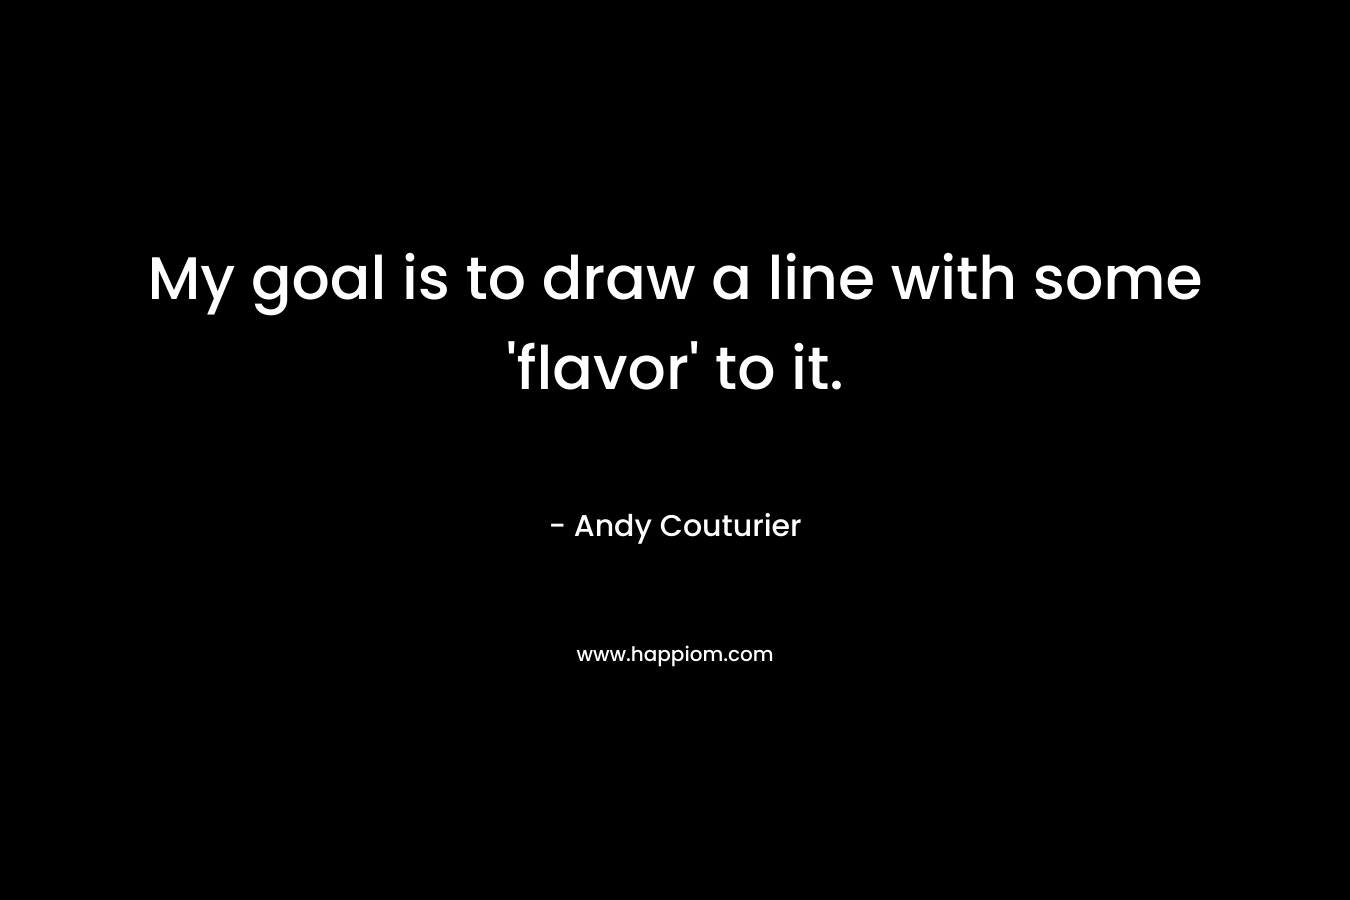 My goal is to draw a line with some ‘flavor’ to it. – Andy Couturier